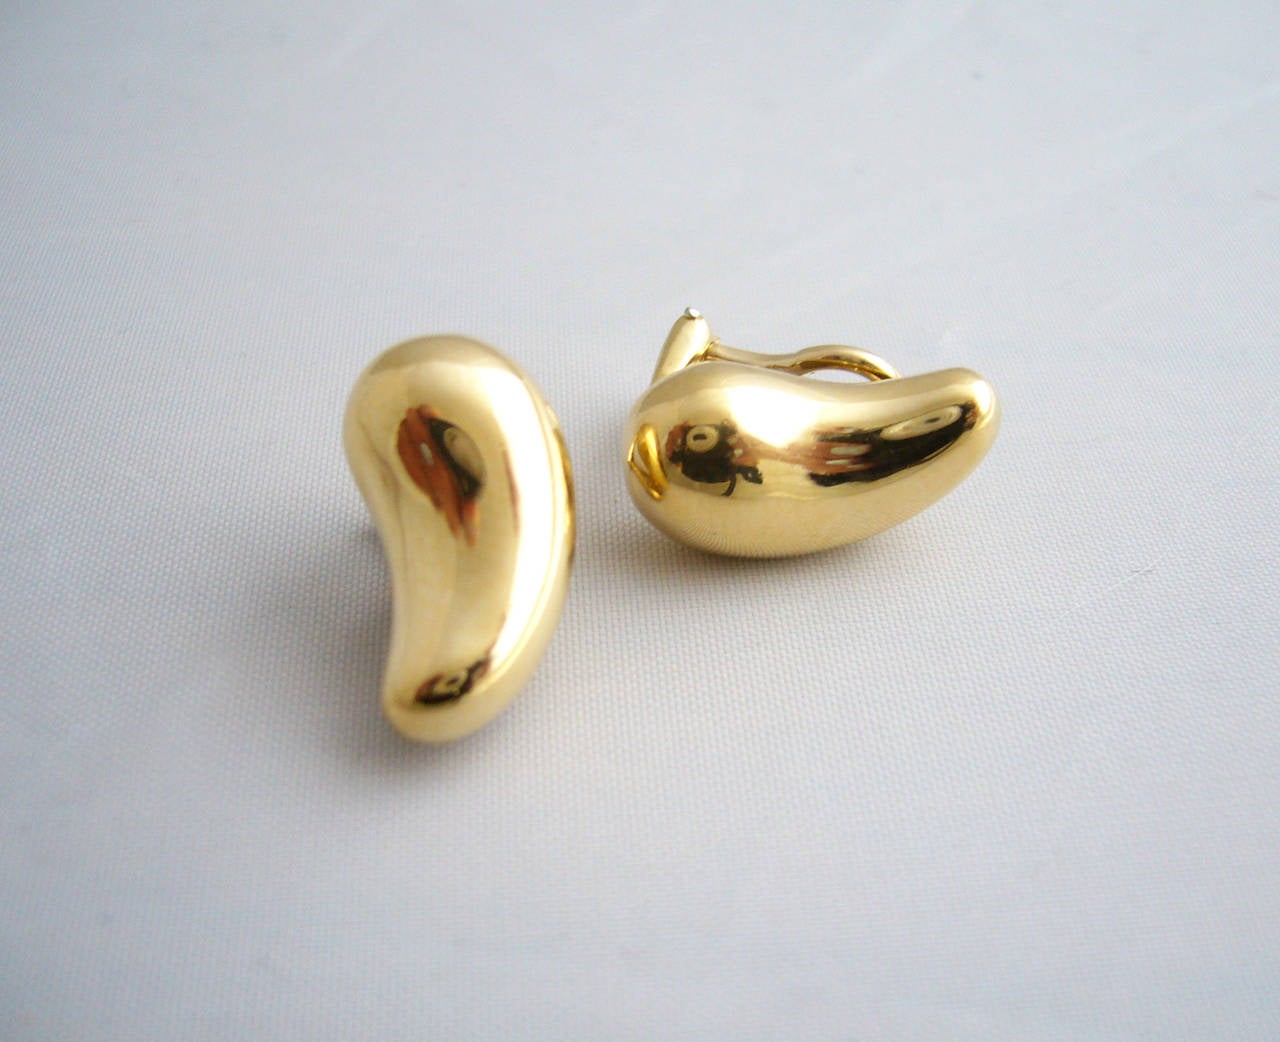 18k gold Elsa Peretti for Tiffany bean clip back earrings.  Can easily be change to posts for pierced ears.  Signed Peretti, Tiffany & Co., 18k.  In very good vintage condition.  7.9 grams.